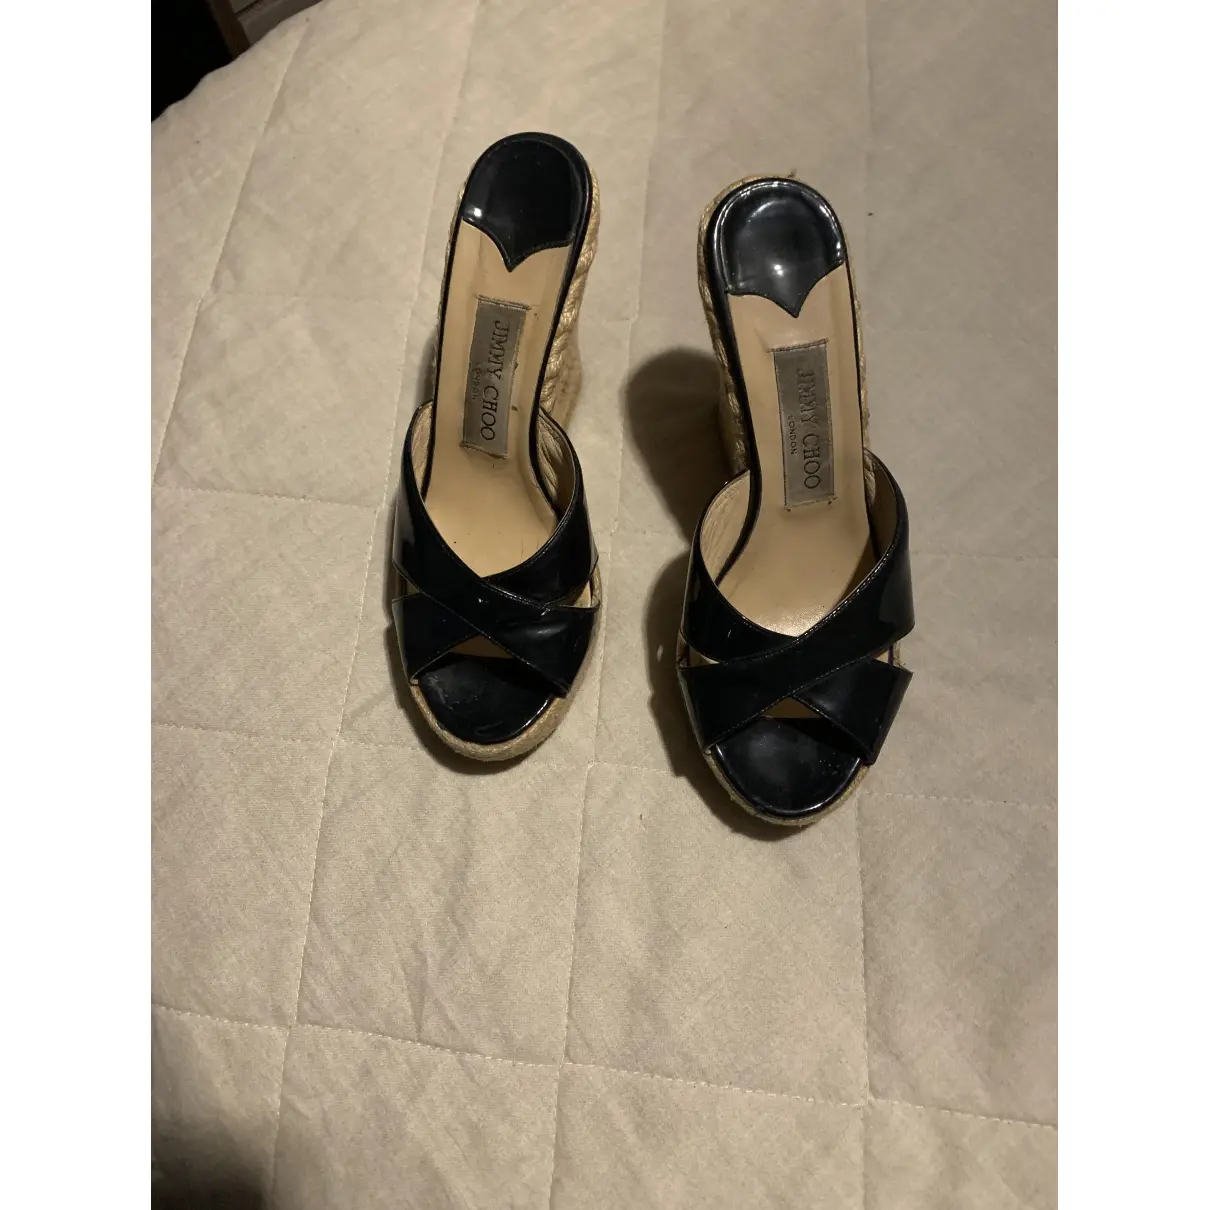 Jimmy Choo Patent leather espadrilles for sale